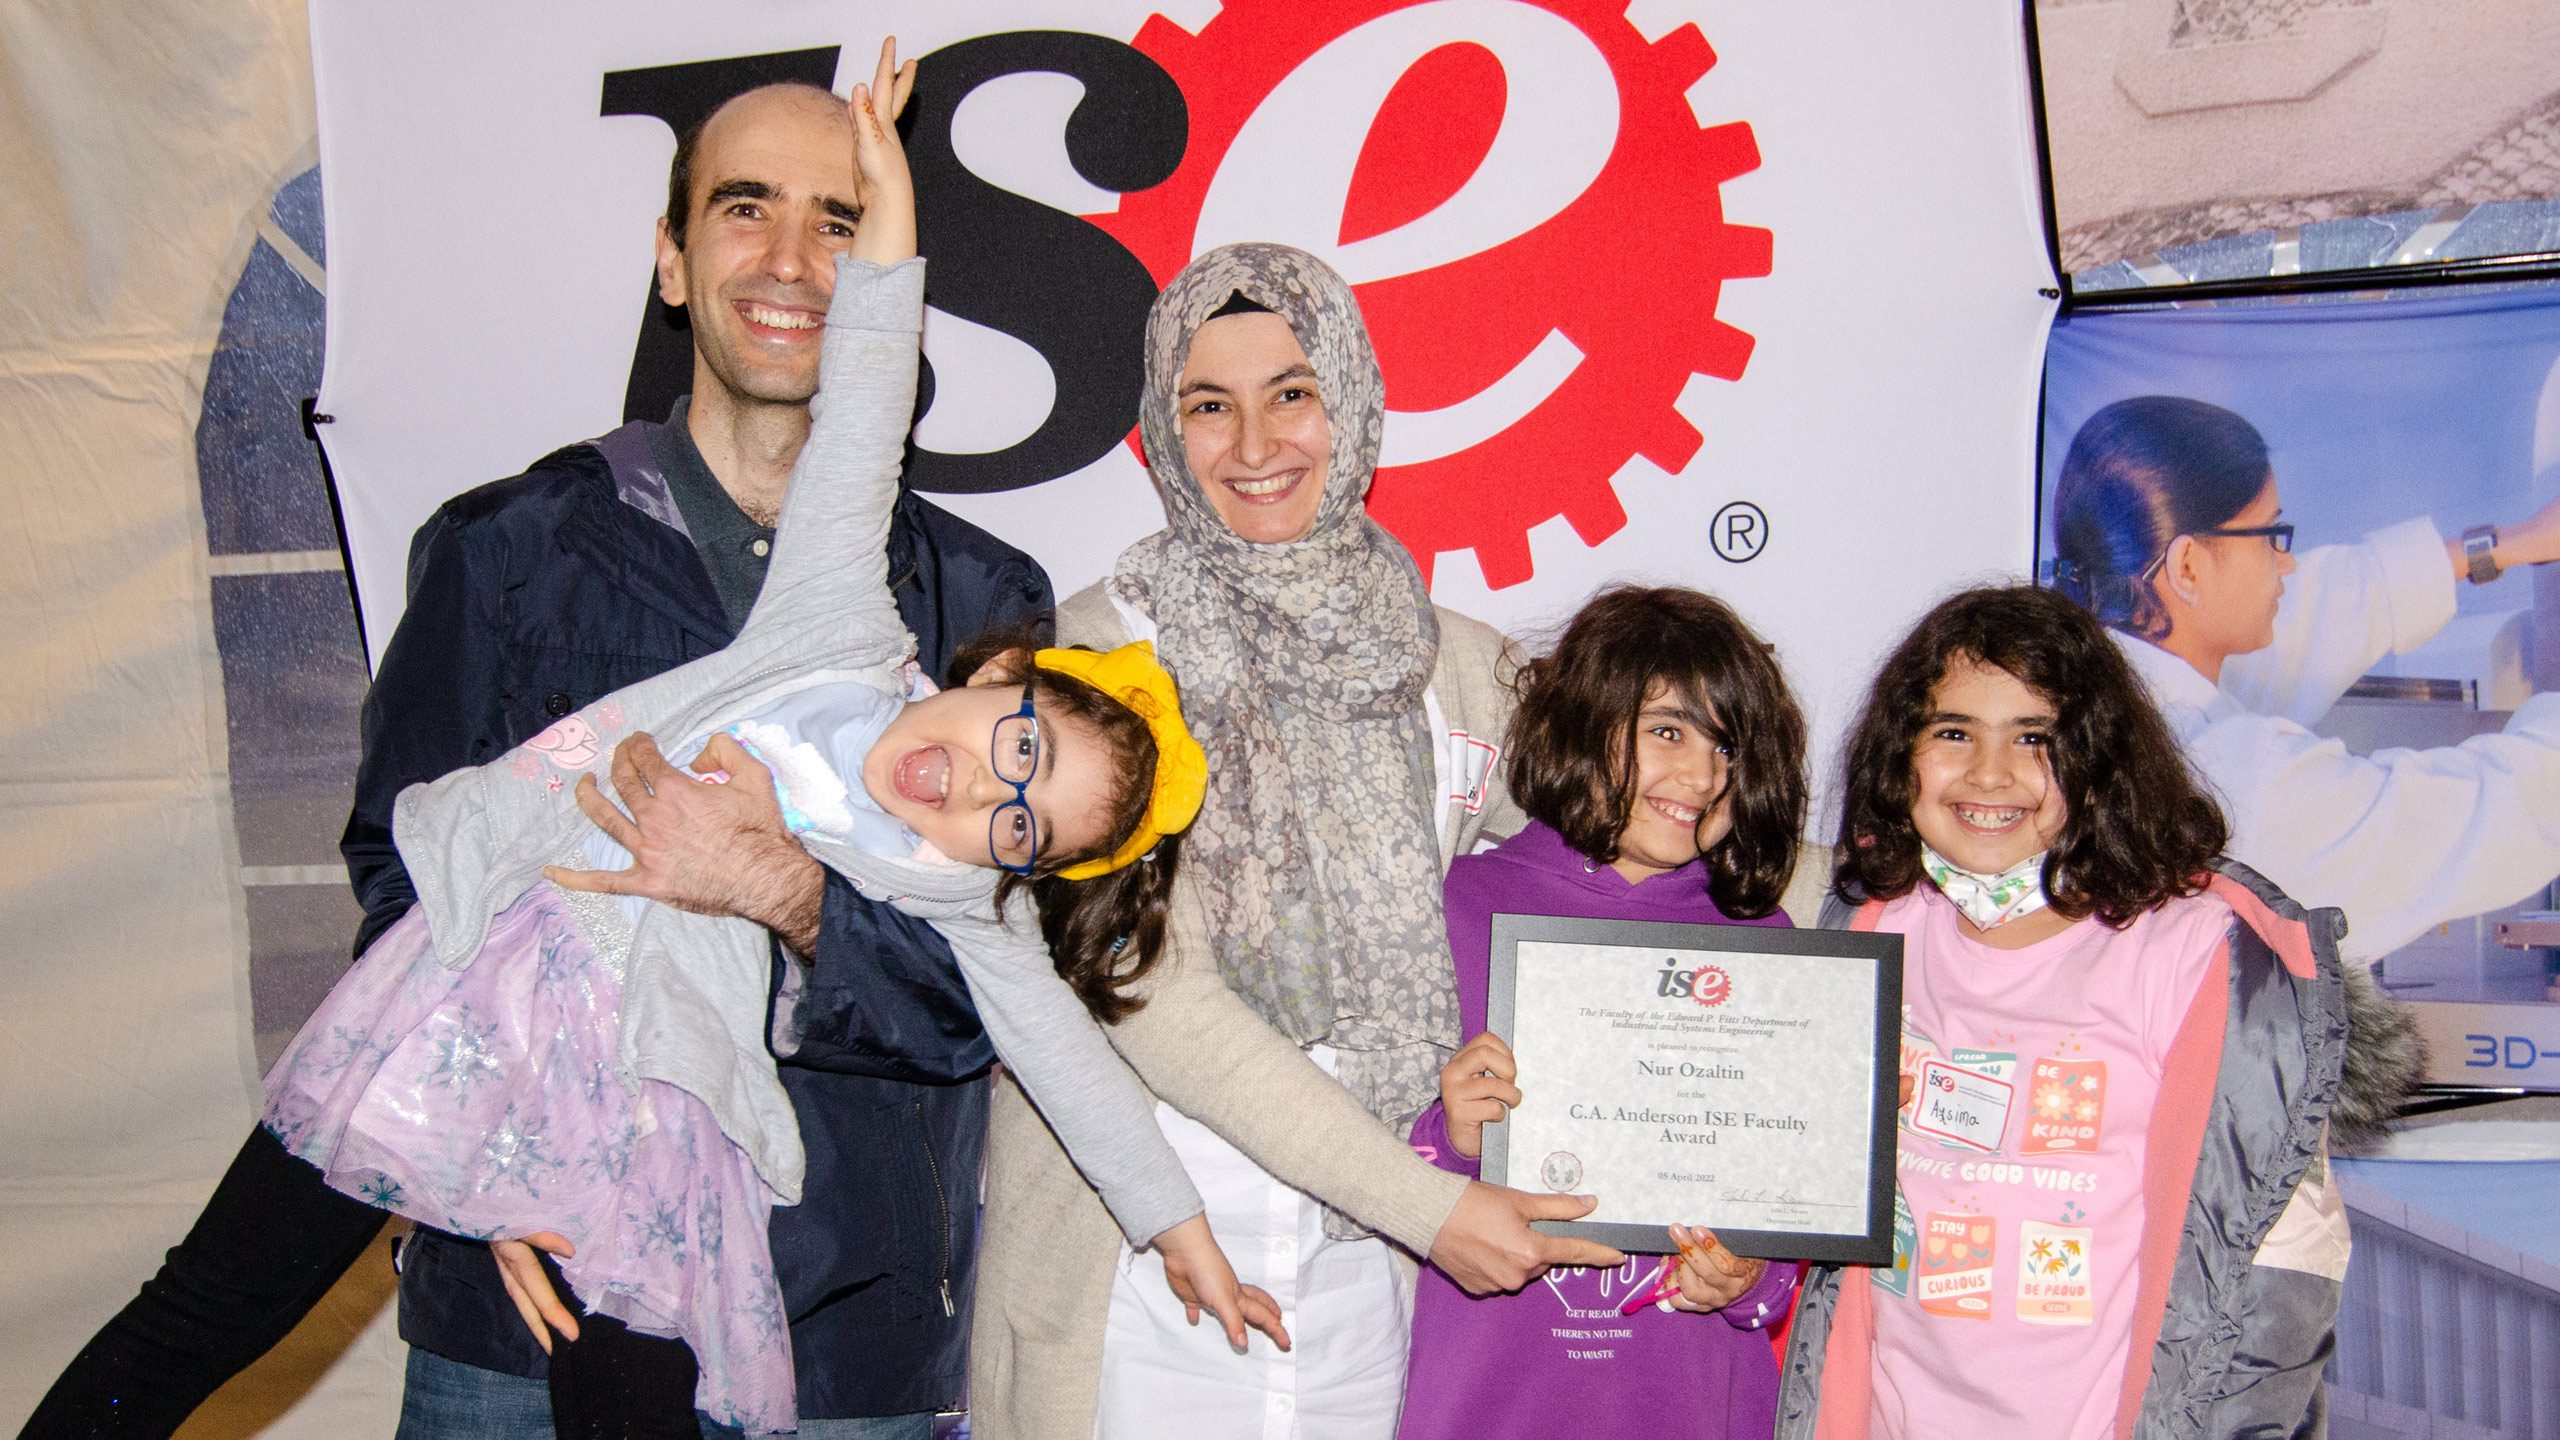 Nur Ozaltin celebrating her award with her family at the 2022 C.A. Anderson Awards